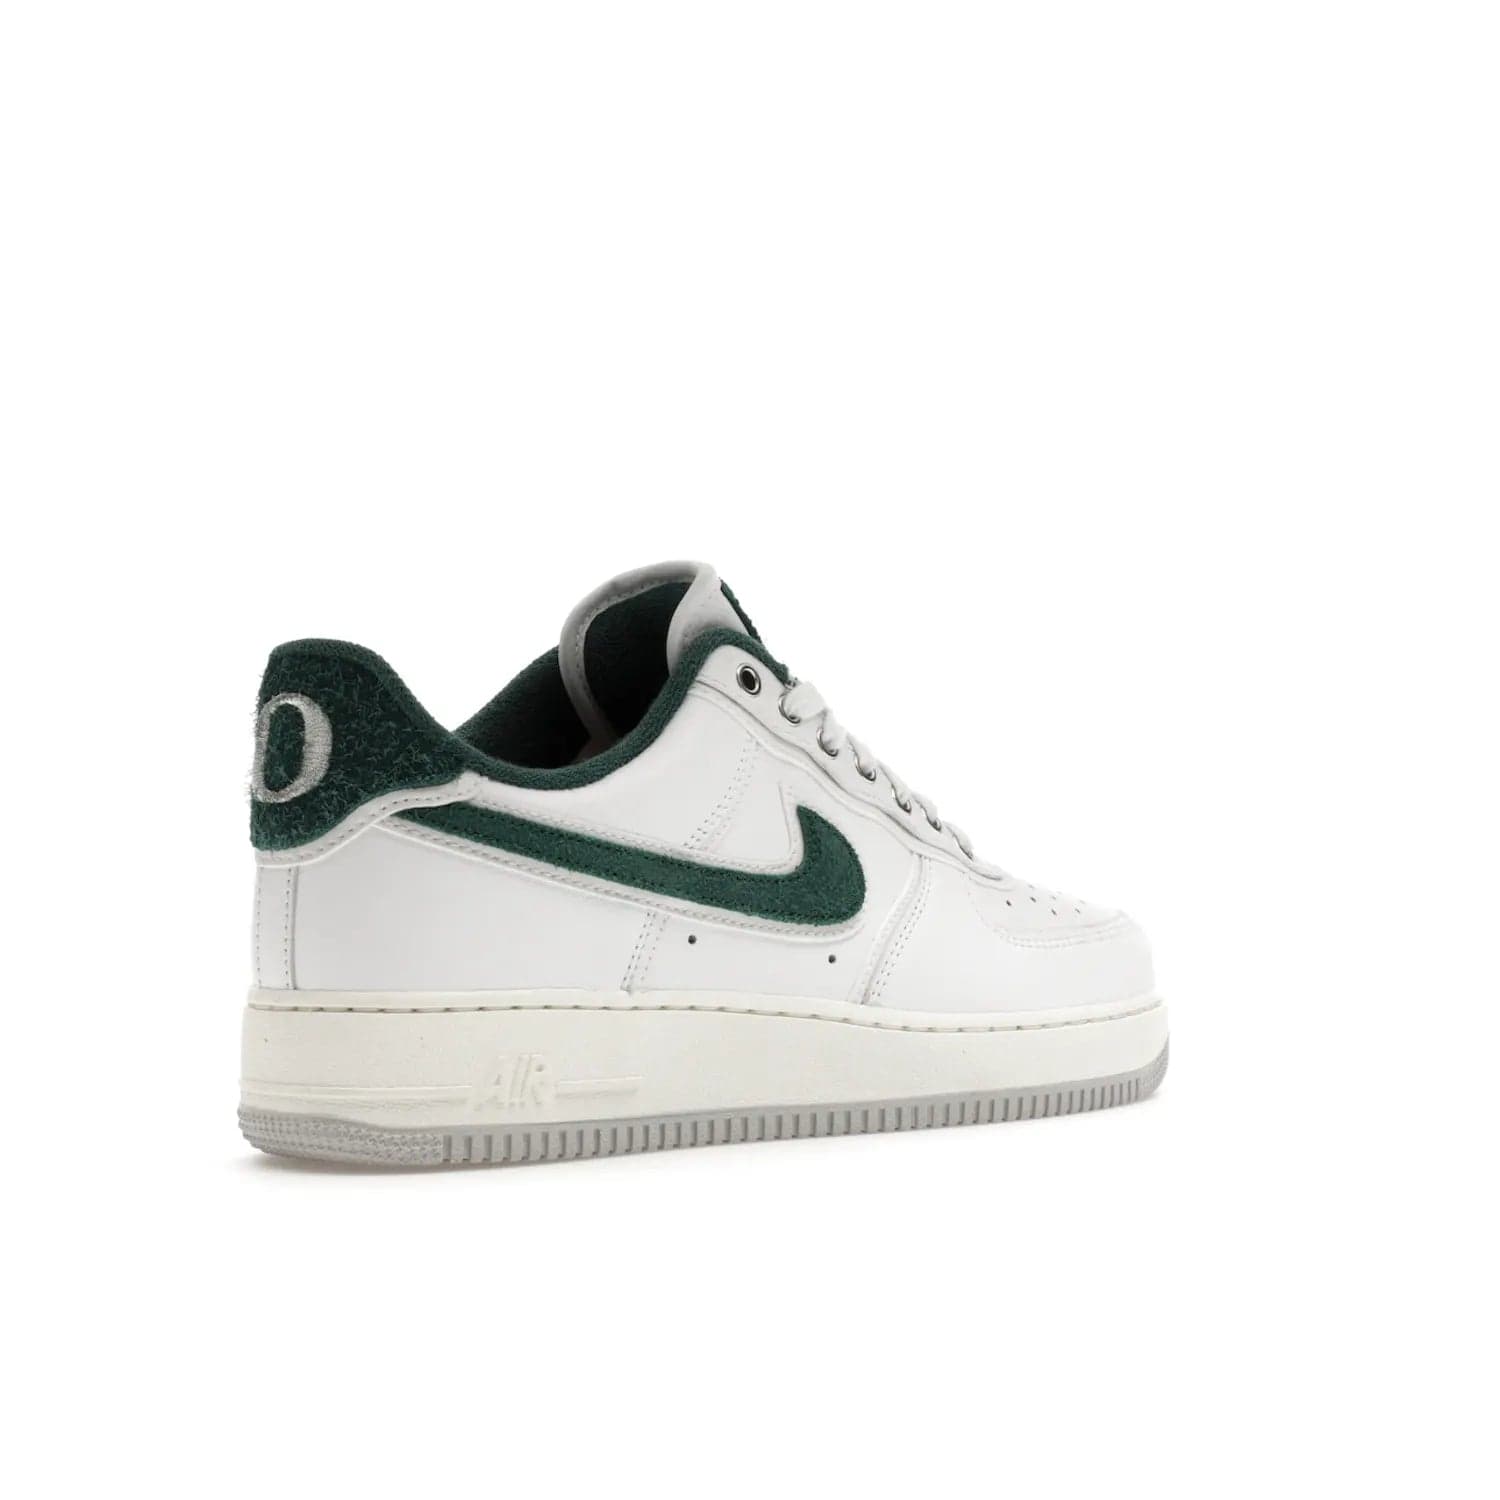 Nike Air Force 1 Low '07 Premium University of Oregon PE - Image 33 - Only at www.BallersClubKickz.com - The Nike Air Force 1 Low '07 Premium. Special Oregon University colorway. White base with green and sail accents. Cushioned rubber midsole. Comfort and style. Support your school!